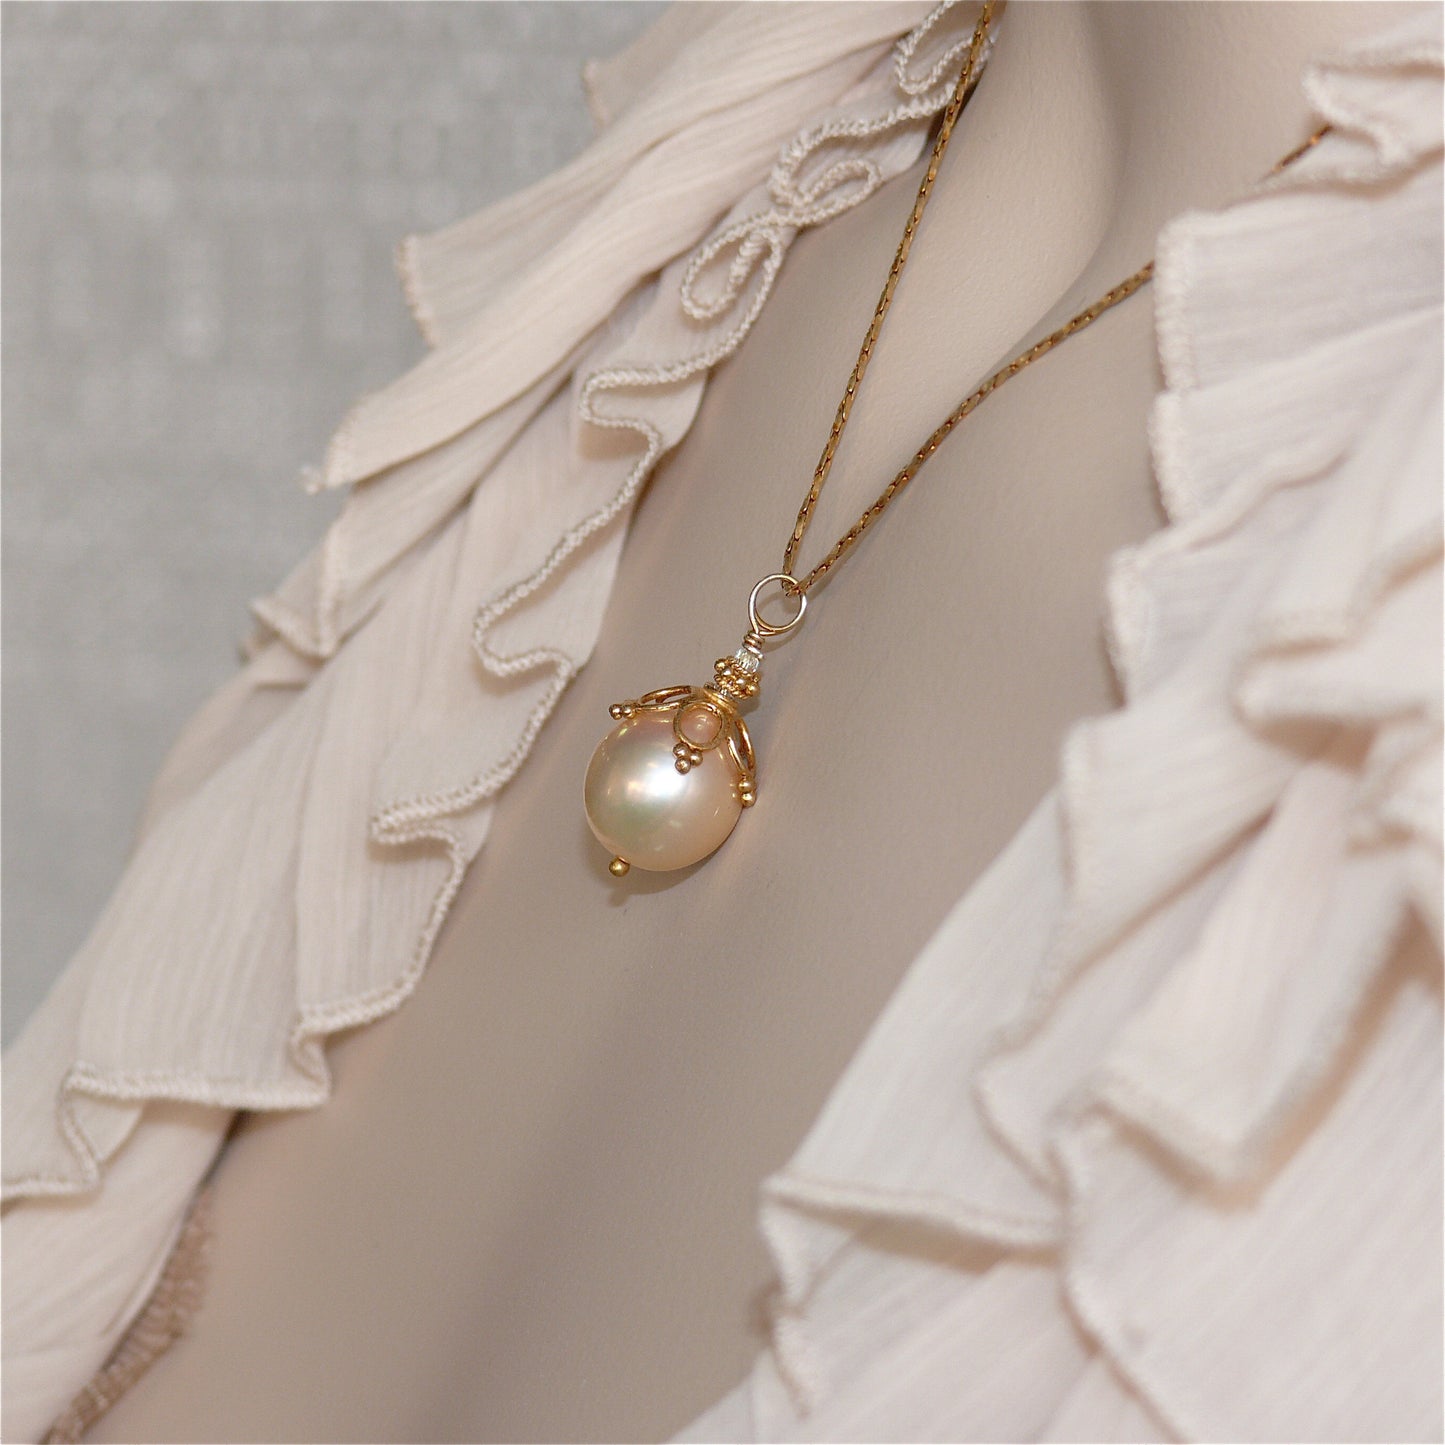 Golden-Peach Plump Pear Pearl Necklace by Arpaia